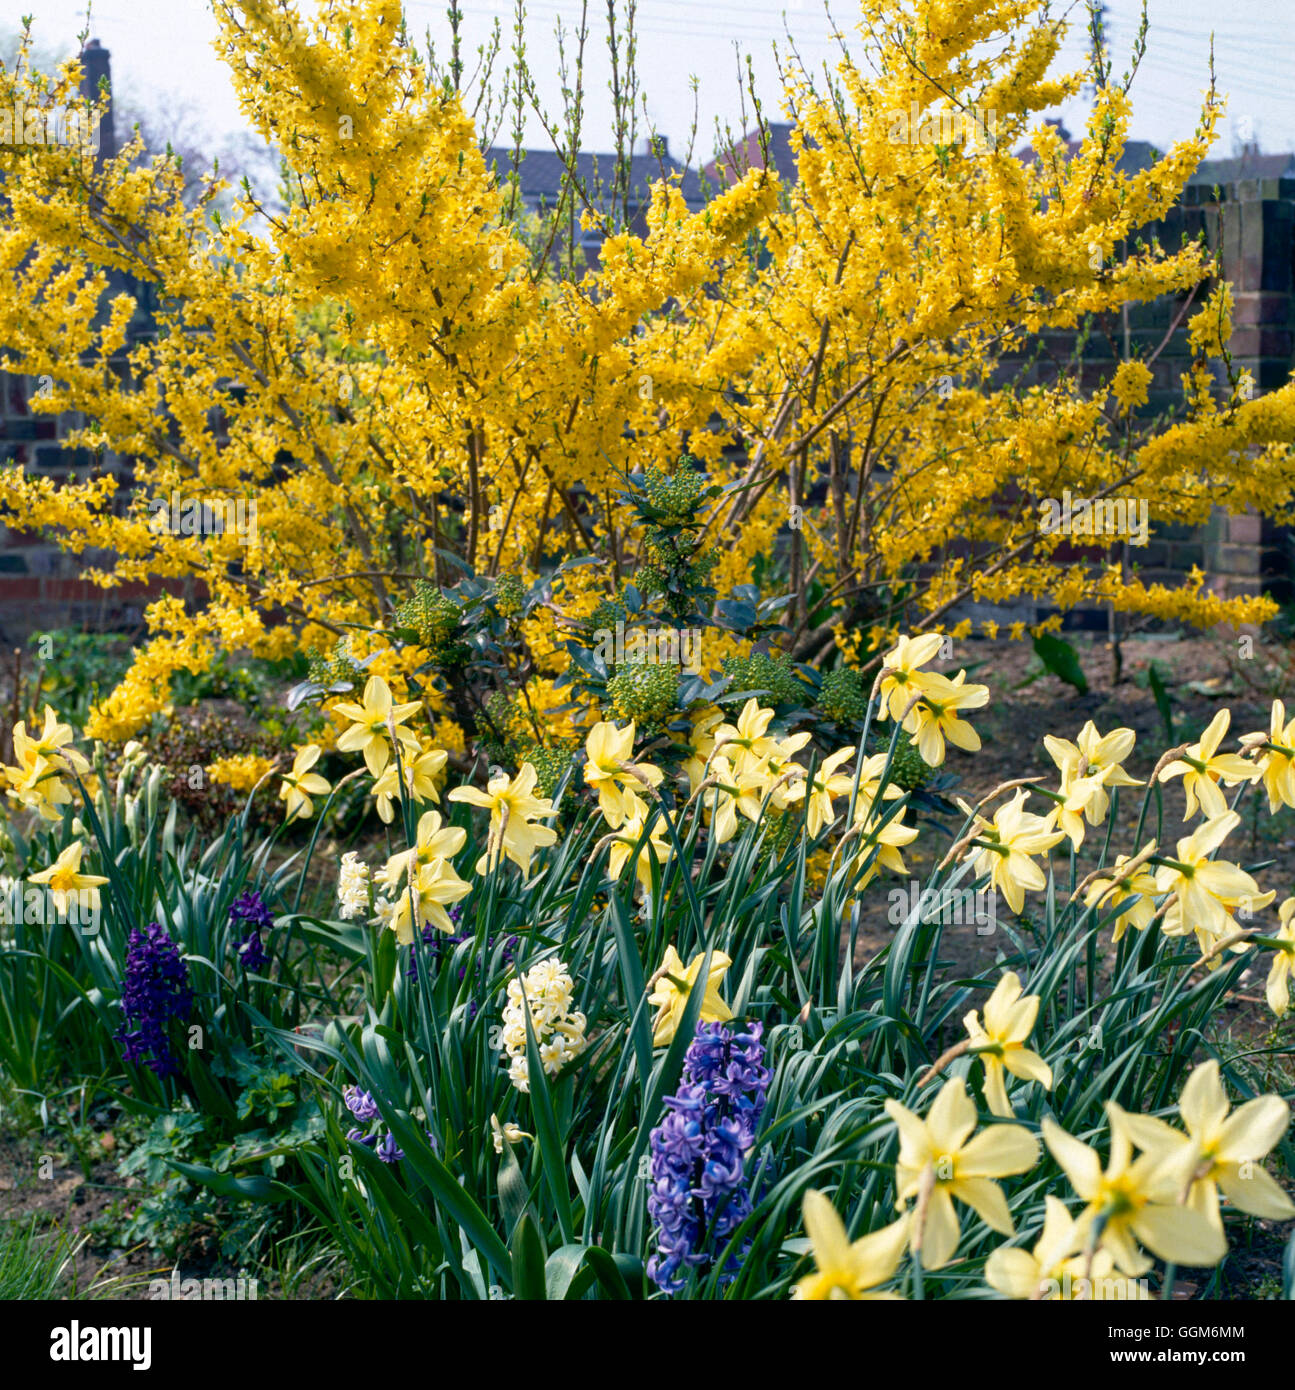 Forsythia x intermedia - `Spectabilis' underplanted with Narcissus and Hyacinthus   TRS004468     Ph Stock Photo